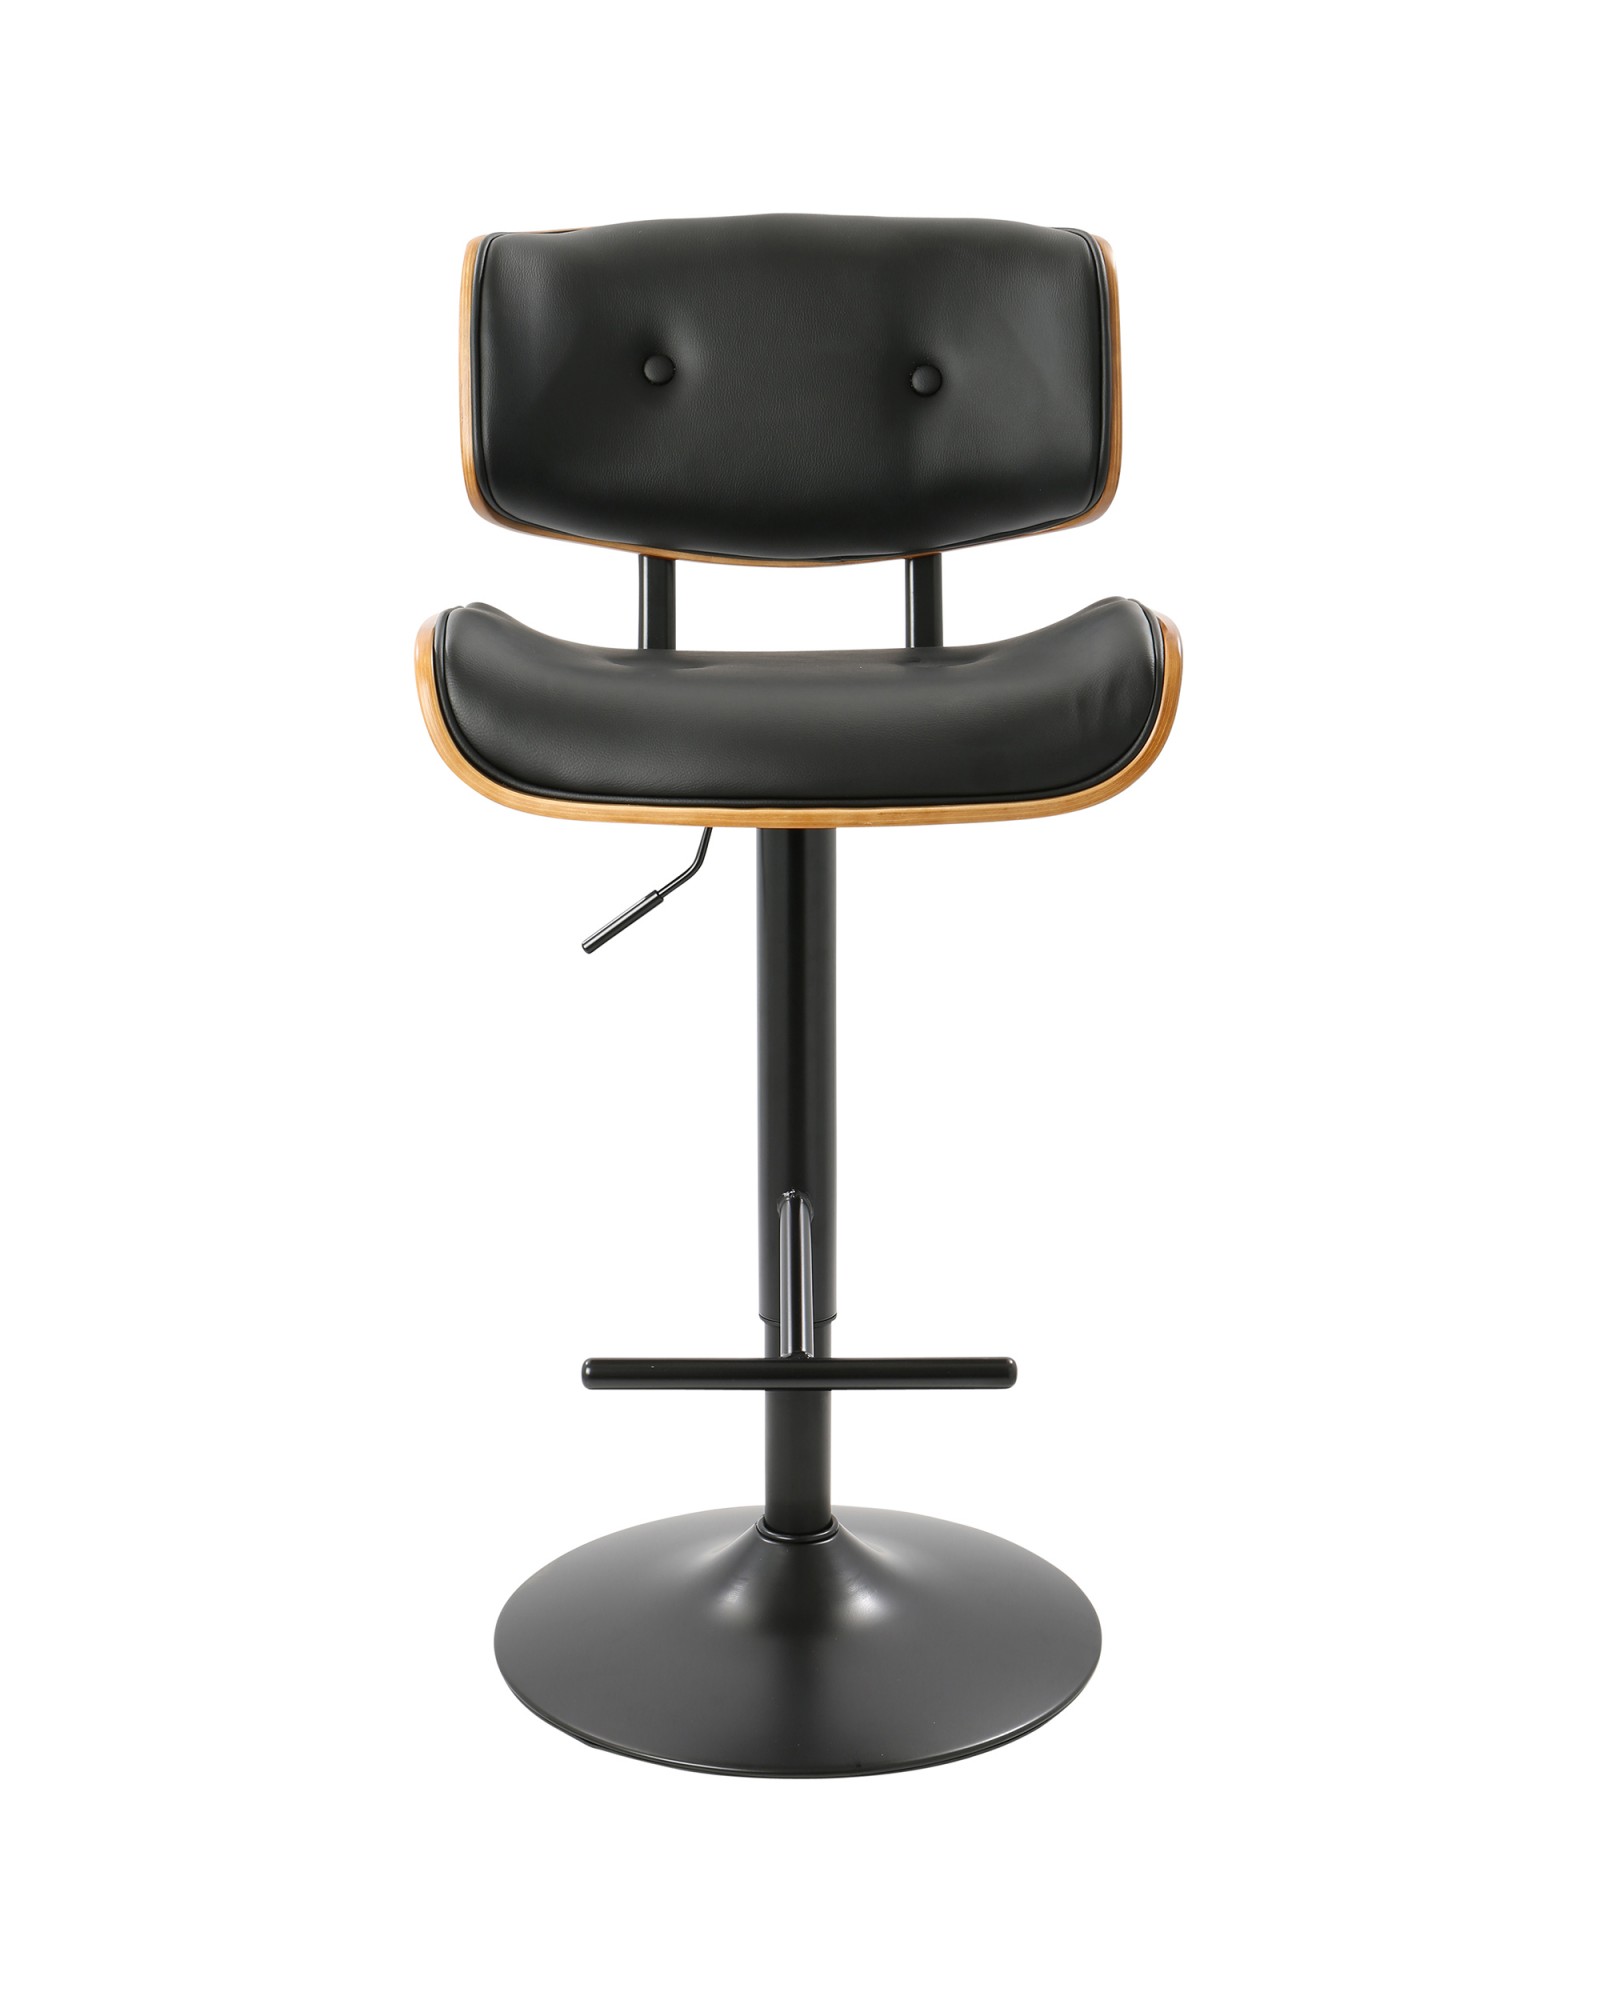 Lombardi Mid-Century Modern Adjustable Barstool in Walnut with Black Faux Leather